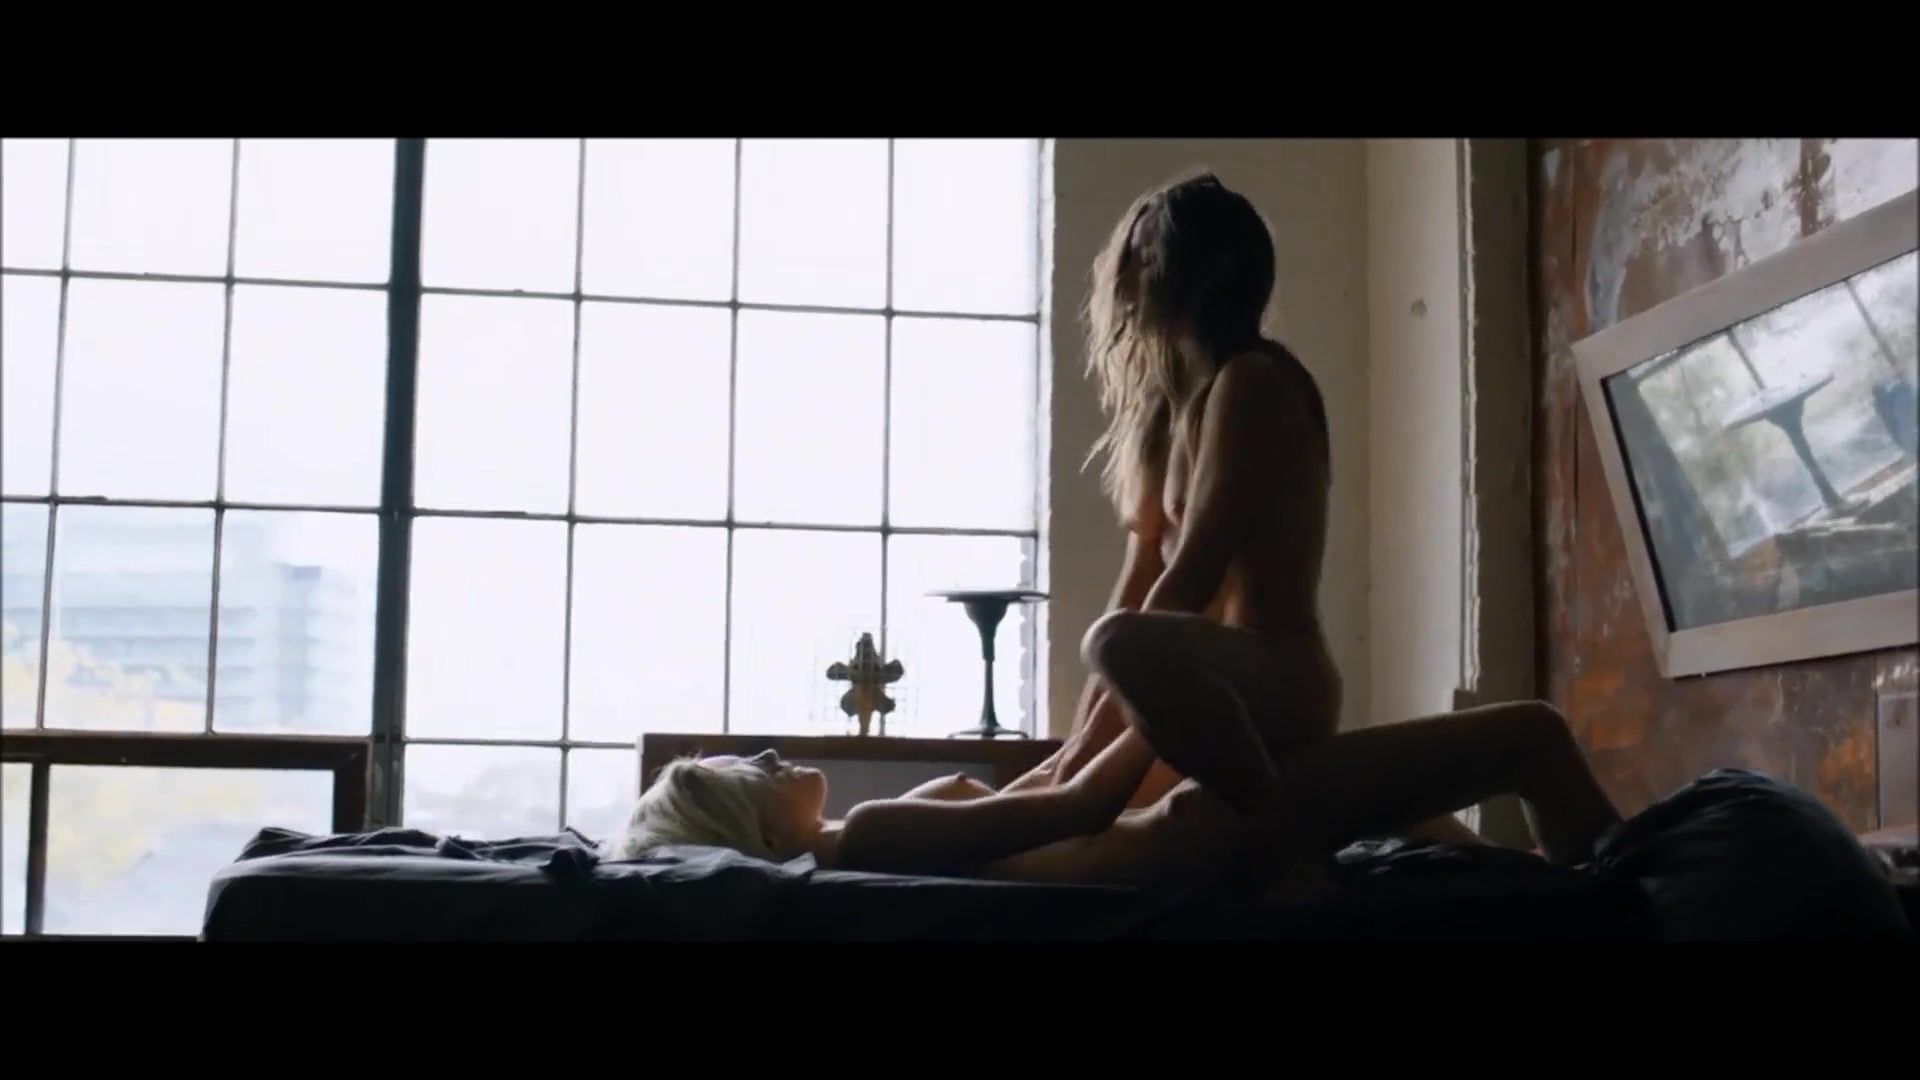 Asses Erika Linder and Natalie Krill rub snatches in lesbian sex scene from Below Her Mouth Shesafreak